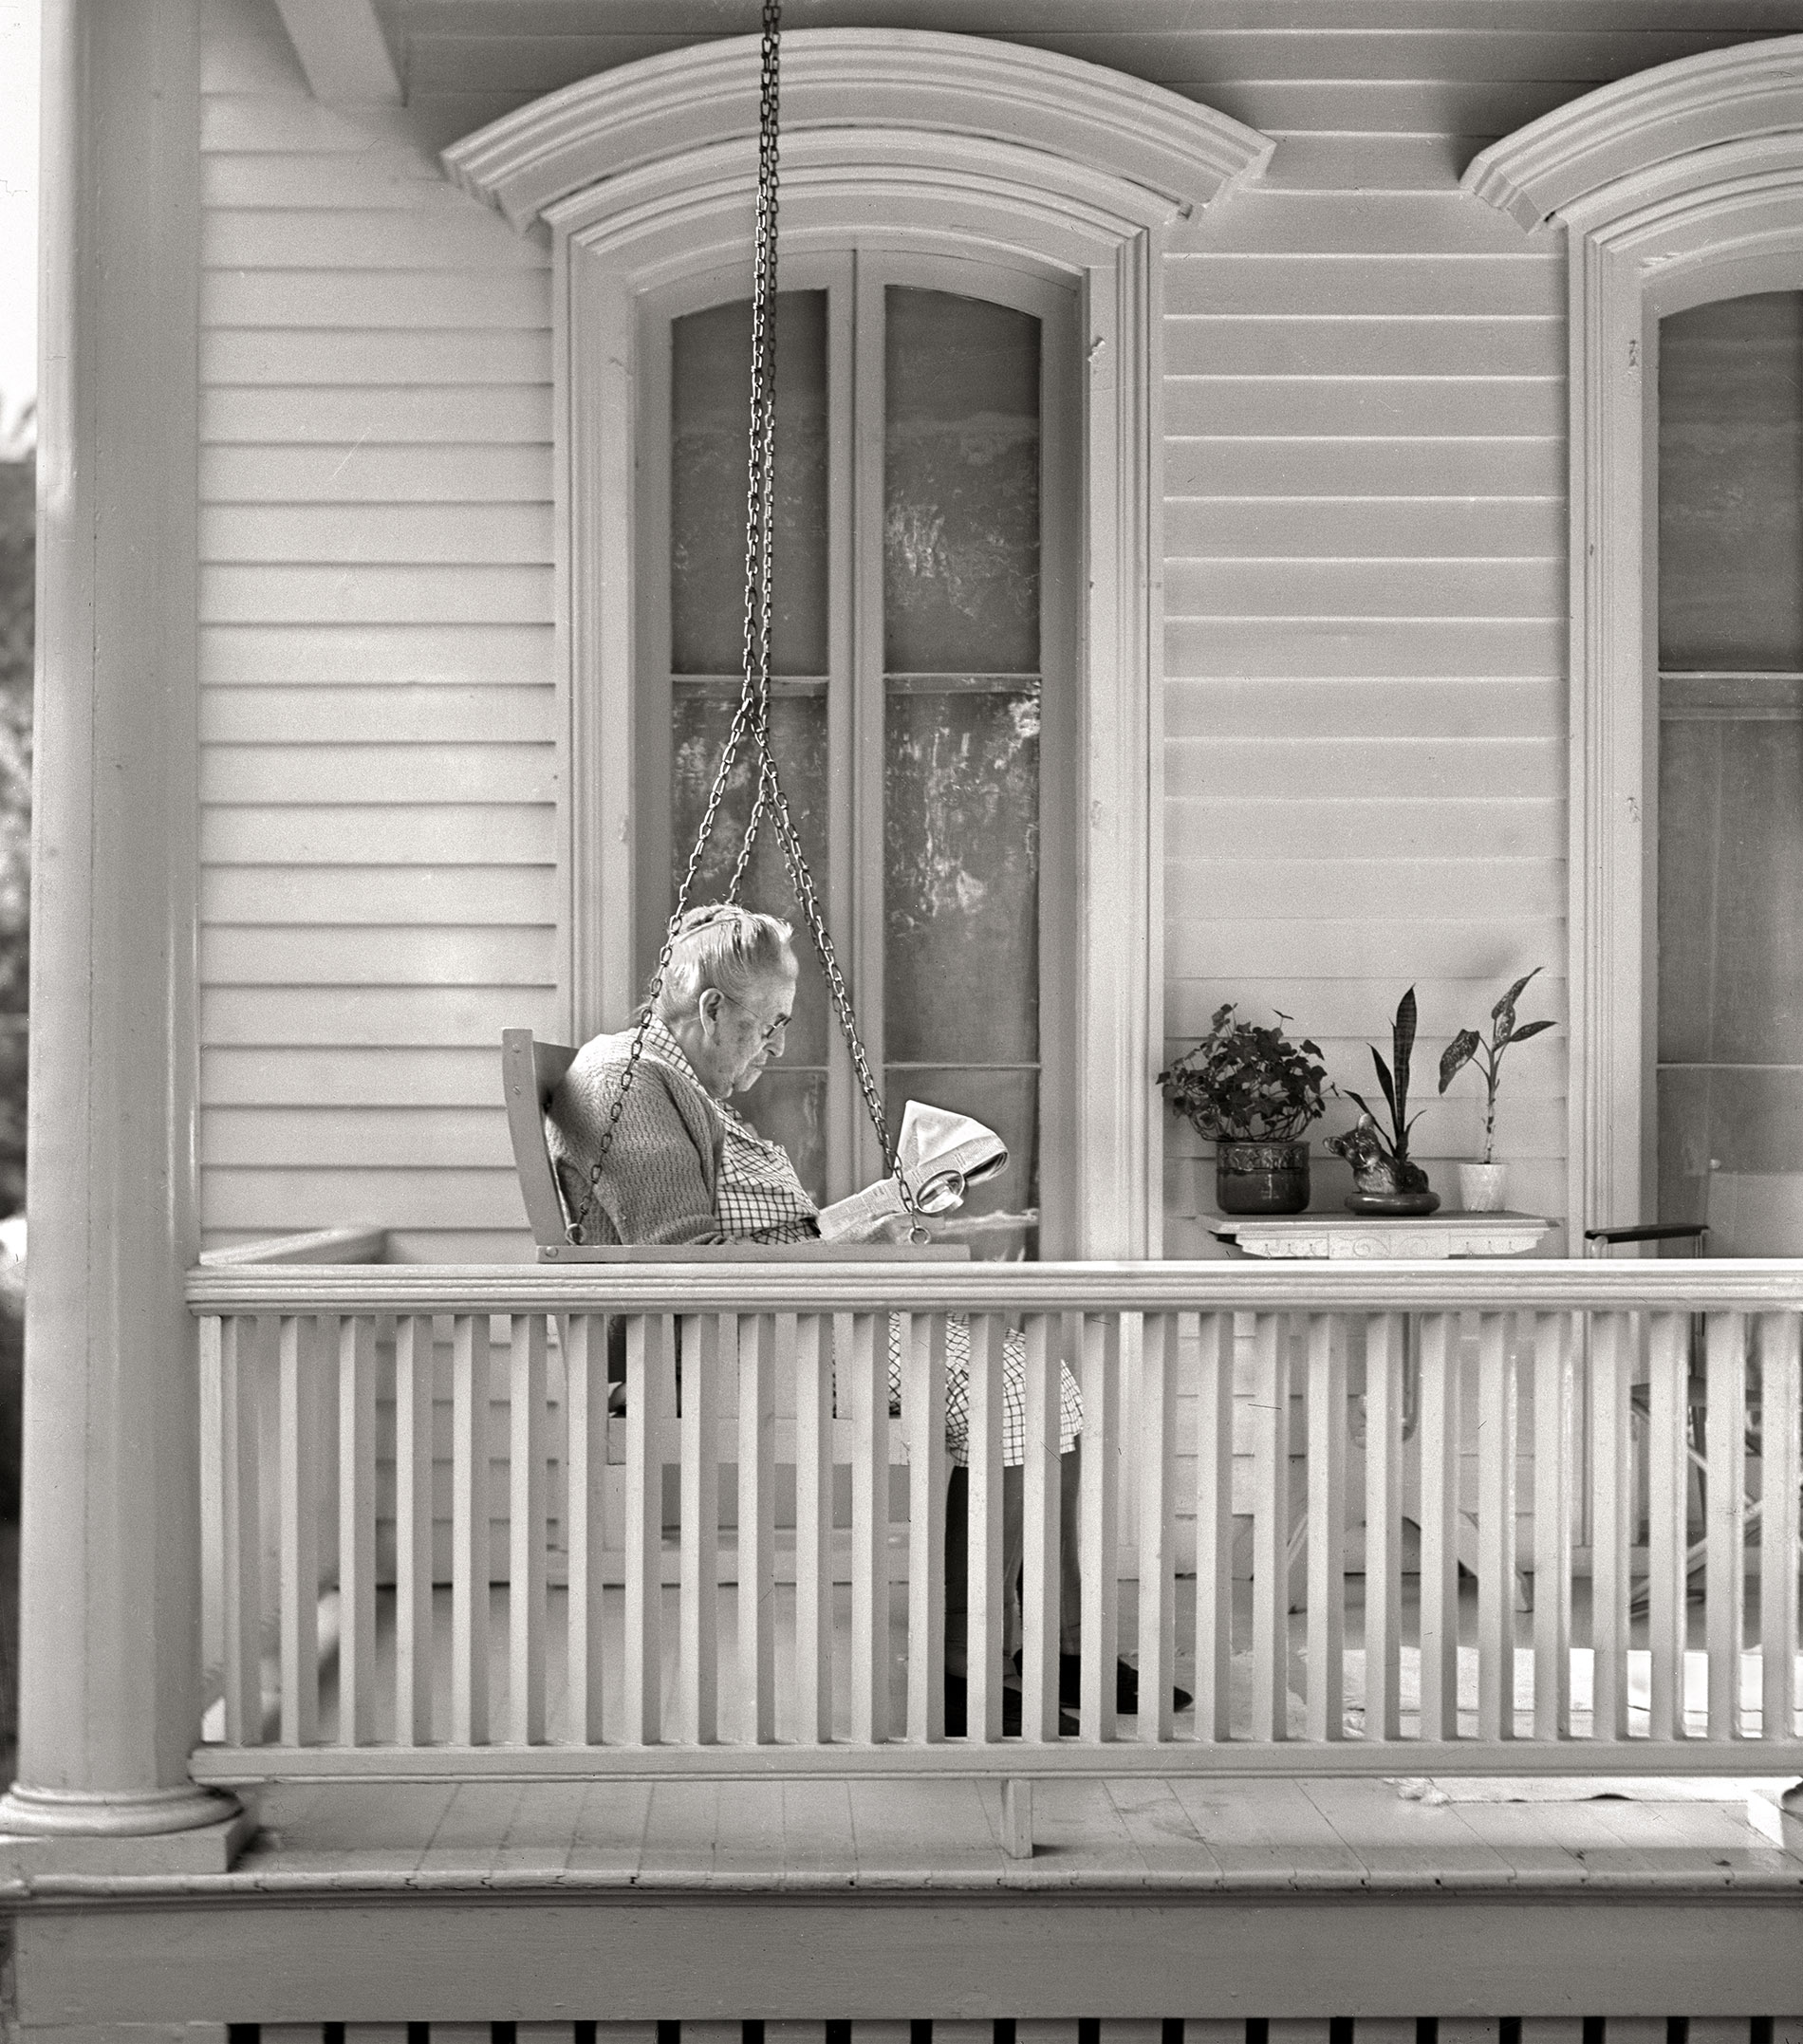 August 1941. "Front porch. Elgin, Illinois." Medium format acetate negative by John Vachon for the Farm Security Administration. View full size.